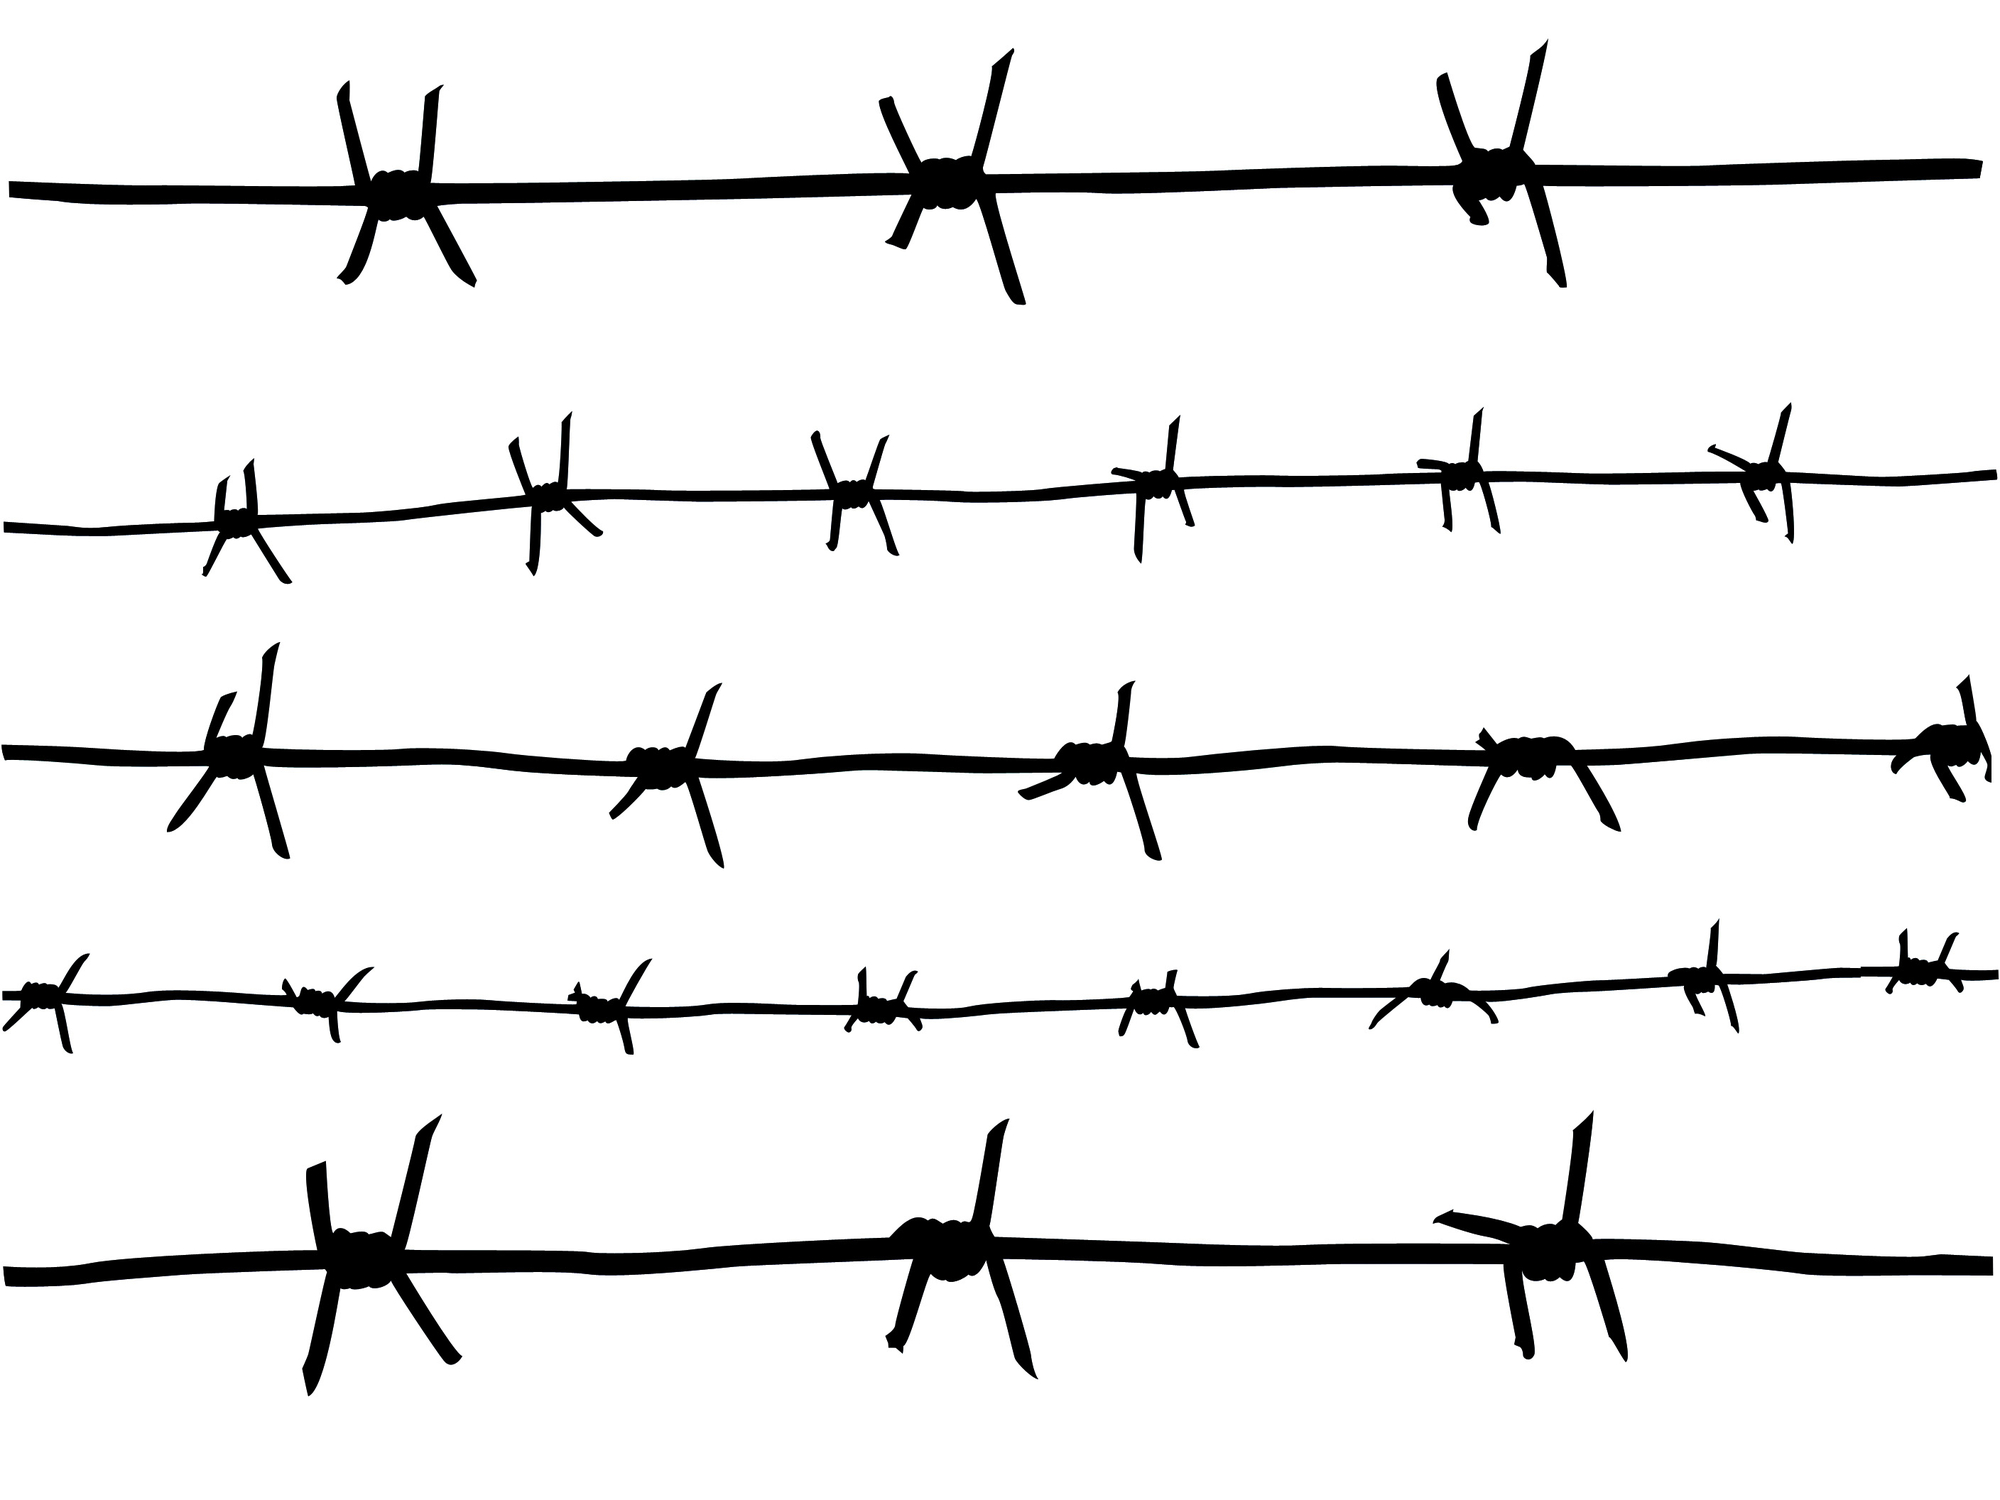 Barbed Wire Tattoo Images & Designs